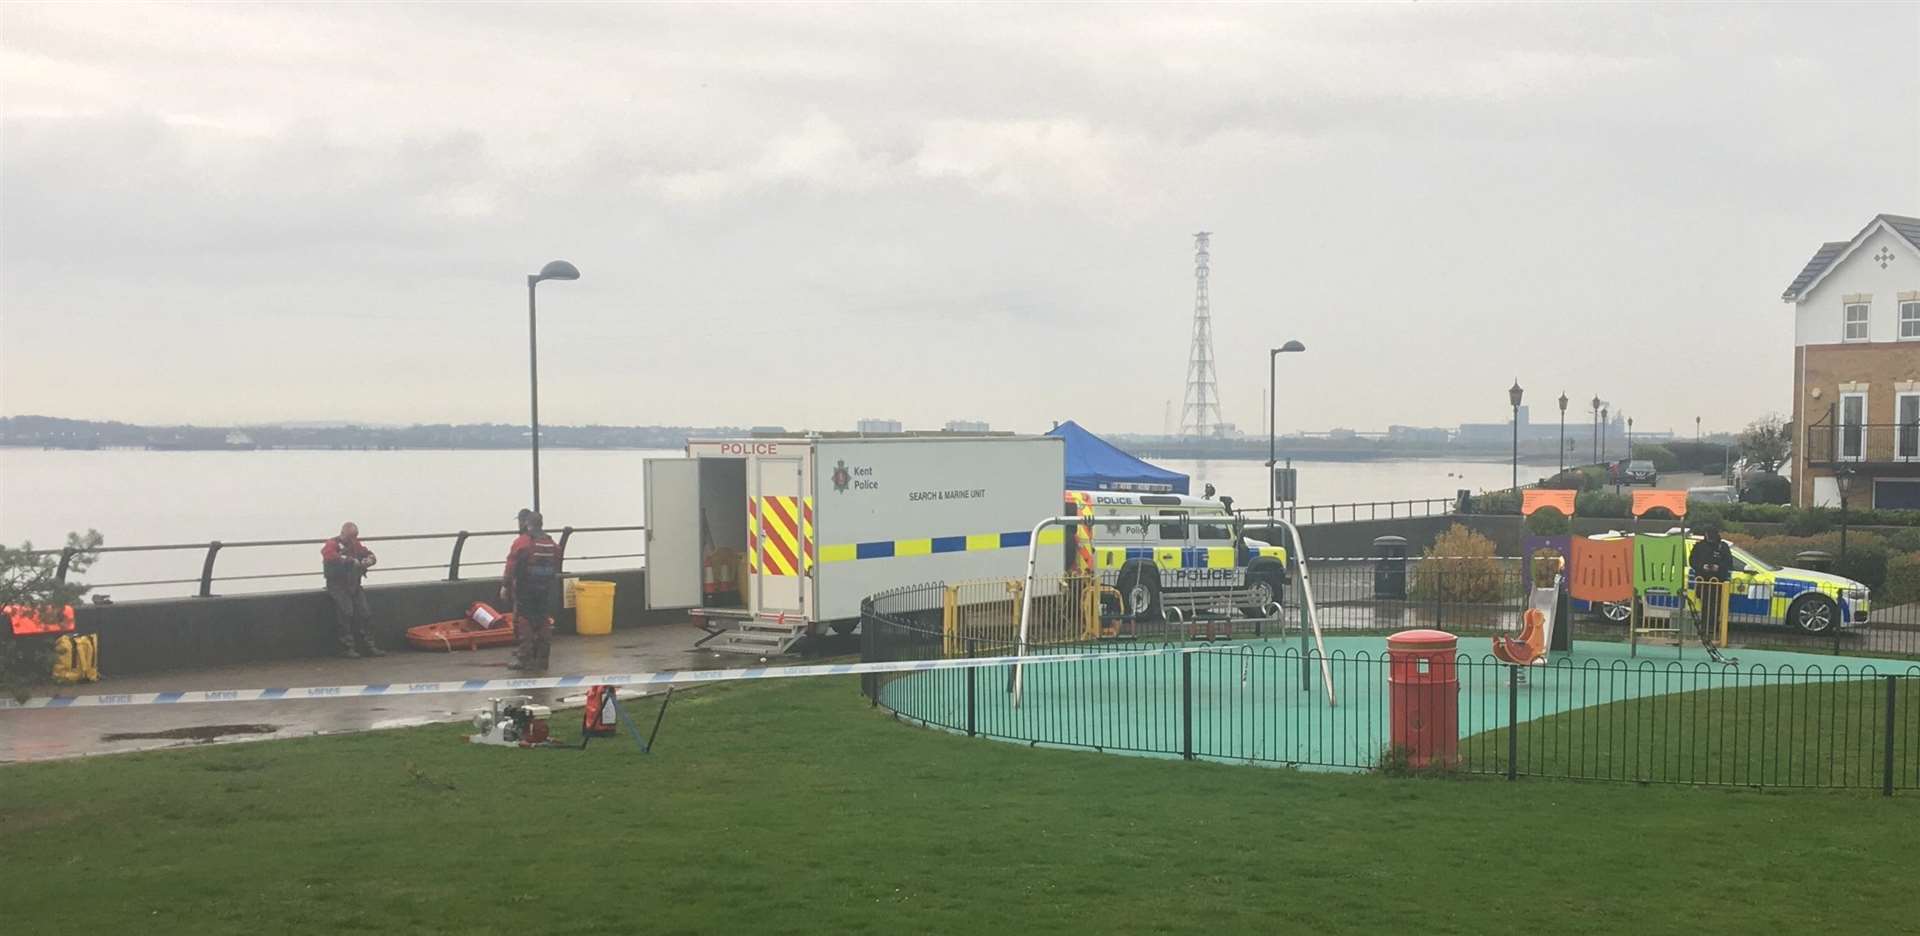 Police marine teams are searching the banks of the River Thames in a bid to find Sarah Wellgreen